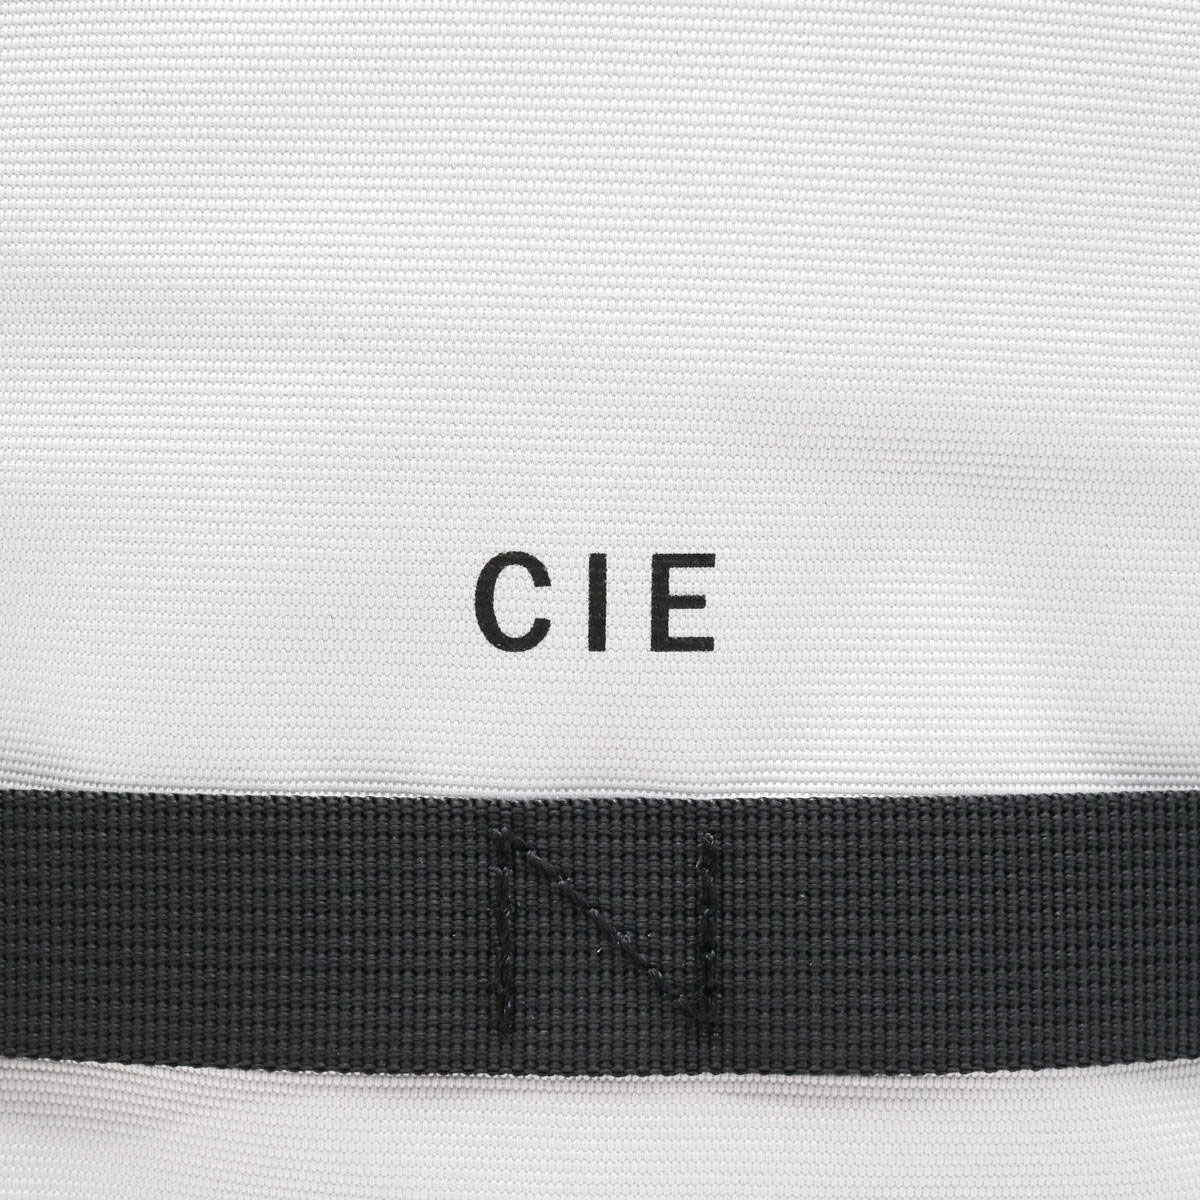 CIE シー GRID-2 2WAY BACKPACK-01 2WAYバックパック 031853｜【正規